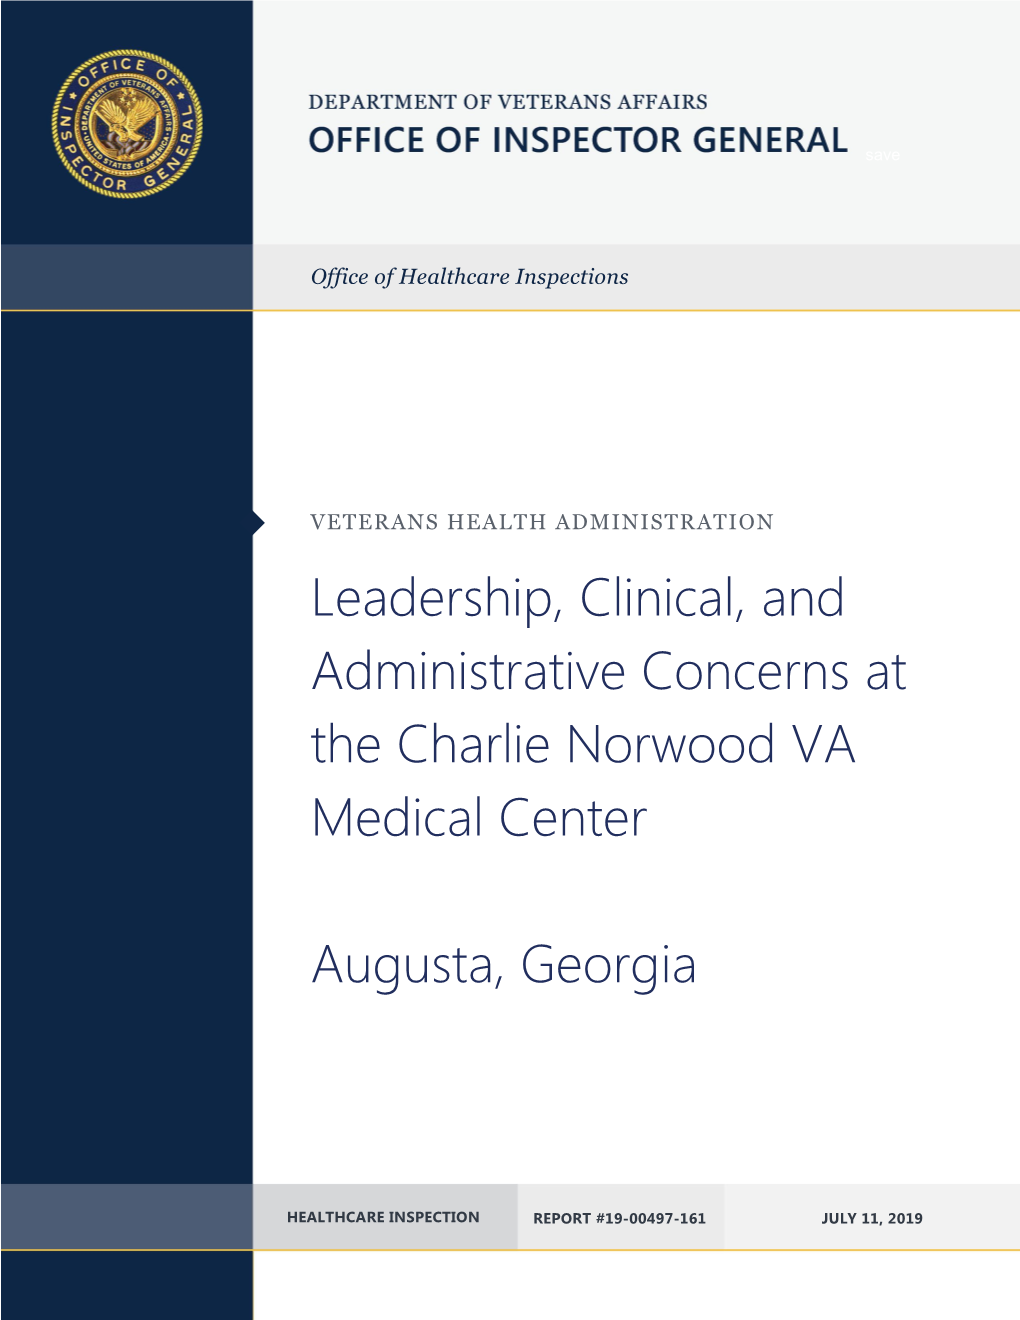 Leadership, Clinical, and Administrative Concerns at the Charlie Norwood VA Medical Center